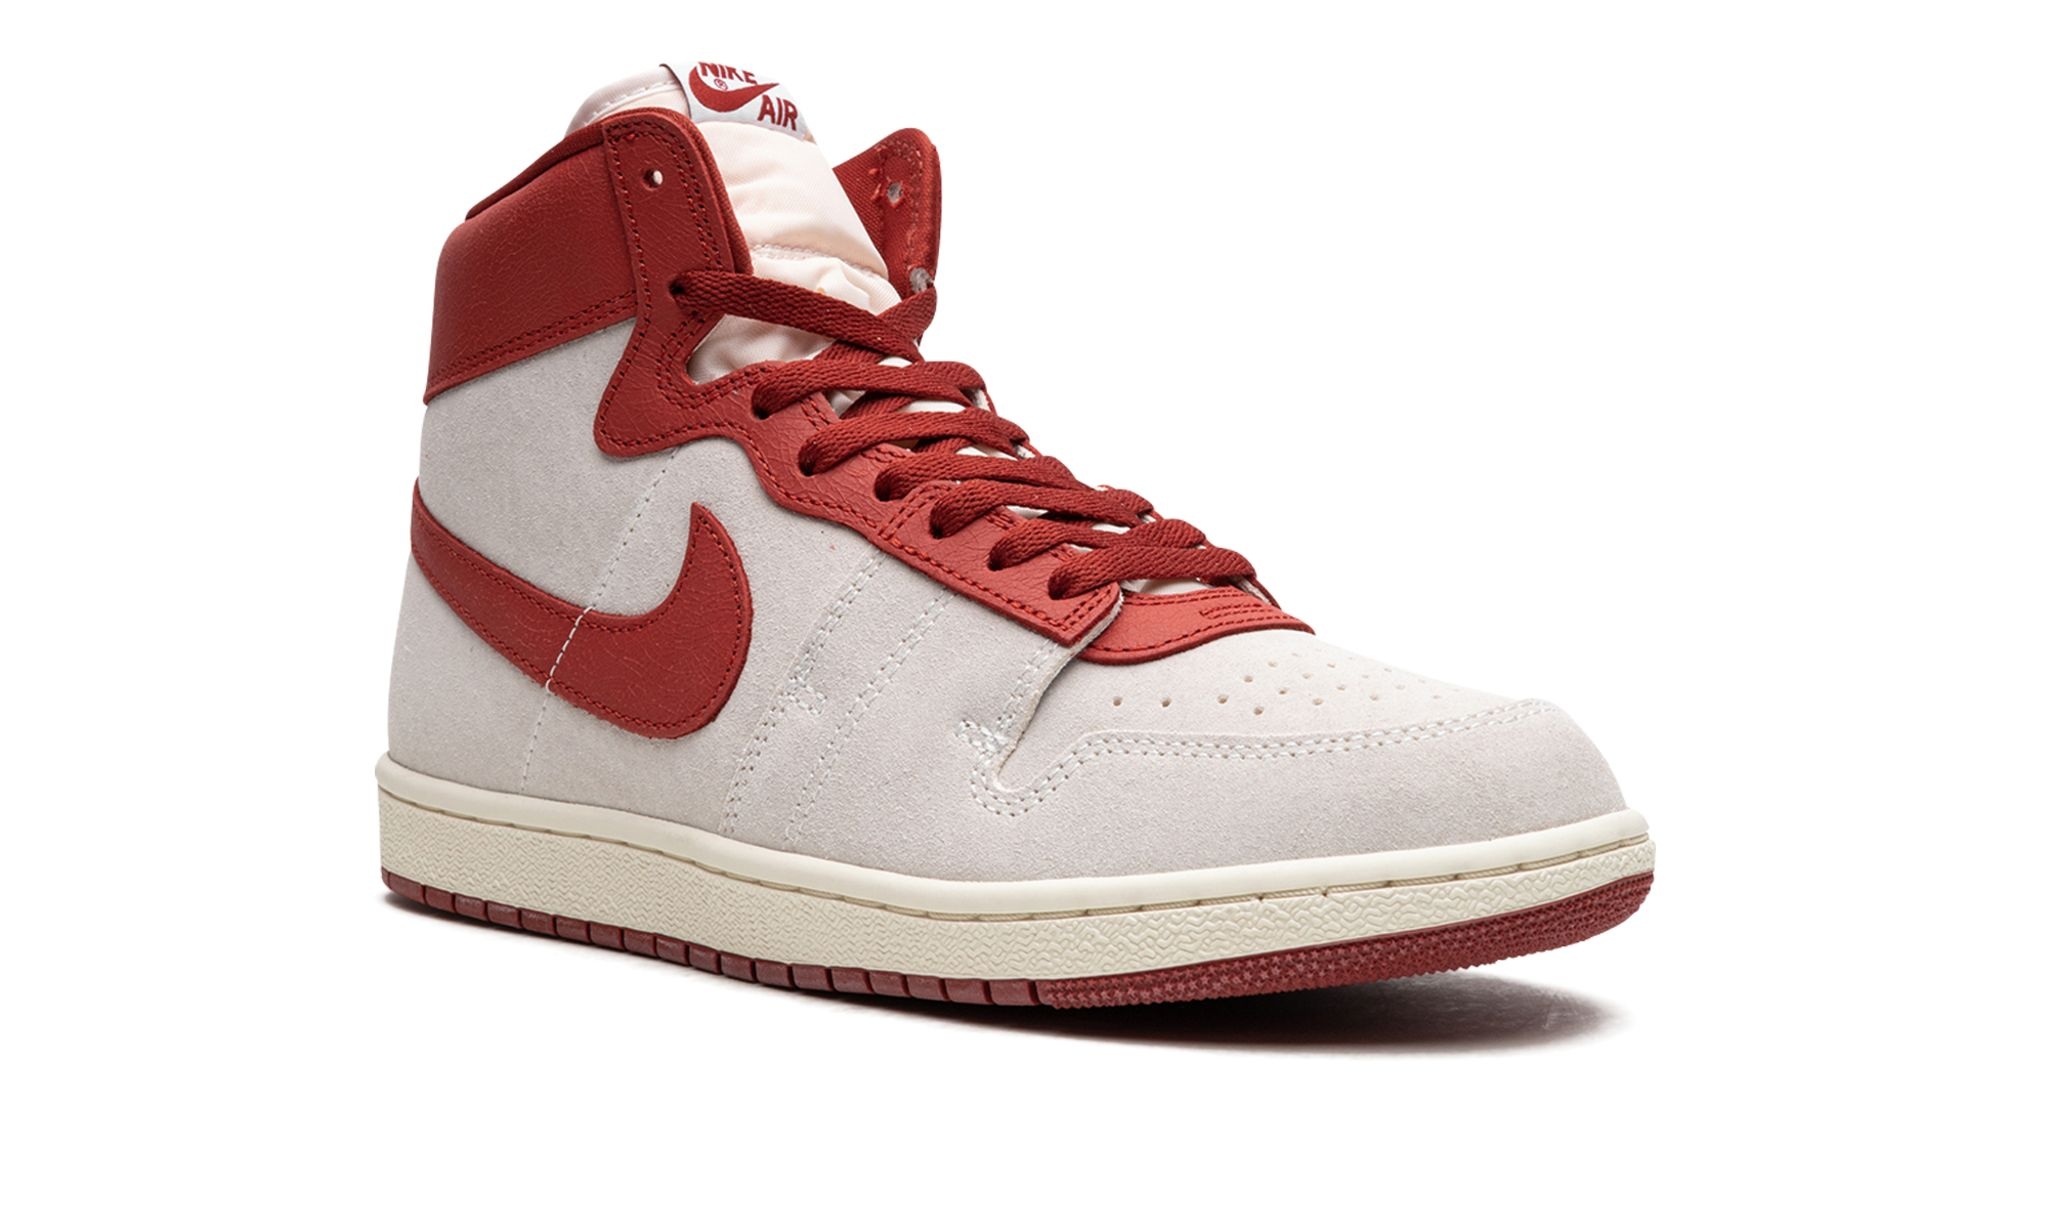 Nike Air Ship "Every Game - Dune Red" - 7